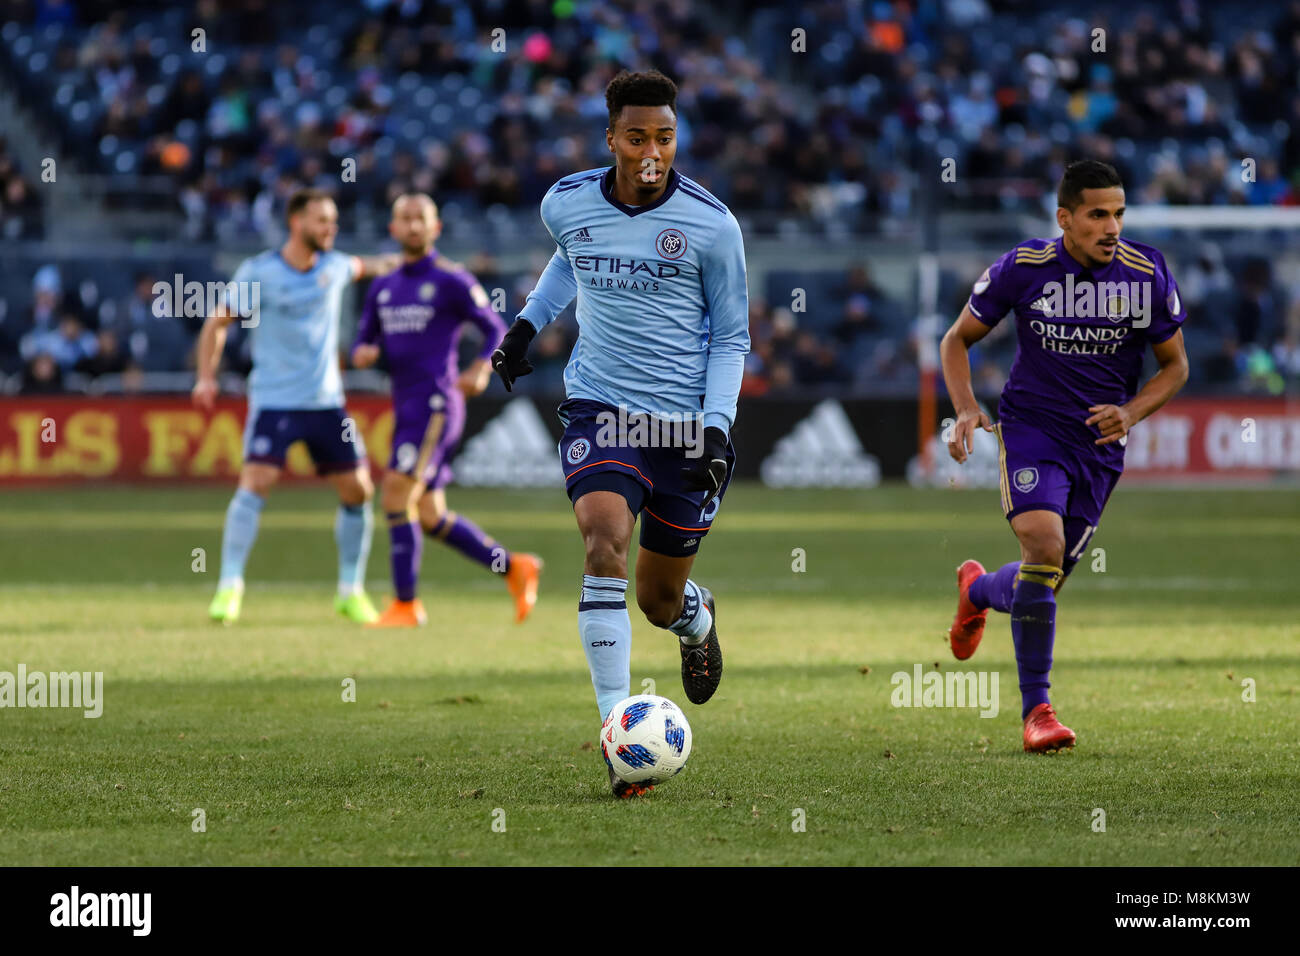 NYCFC vs Orlando City SC action at Yankee Stadium on 17th March 2018. NYCFC won 2-0. Saad Abdul-Salaam (13) dribbles up the pitch. Stock Photo